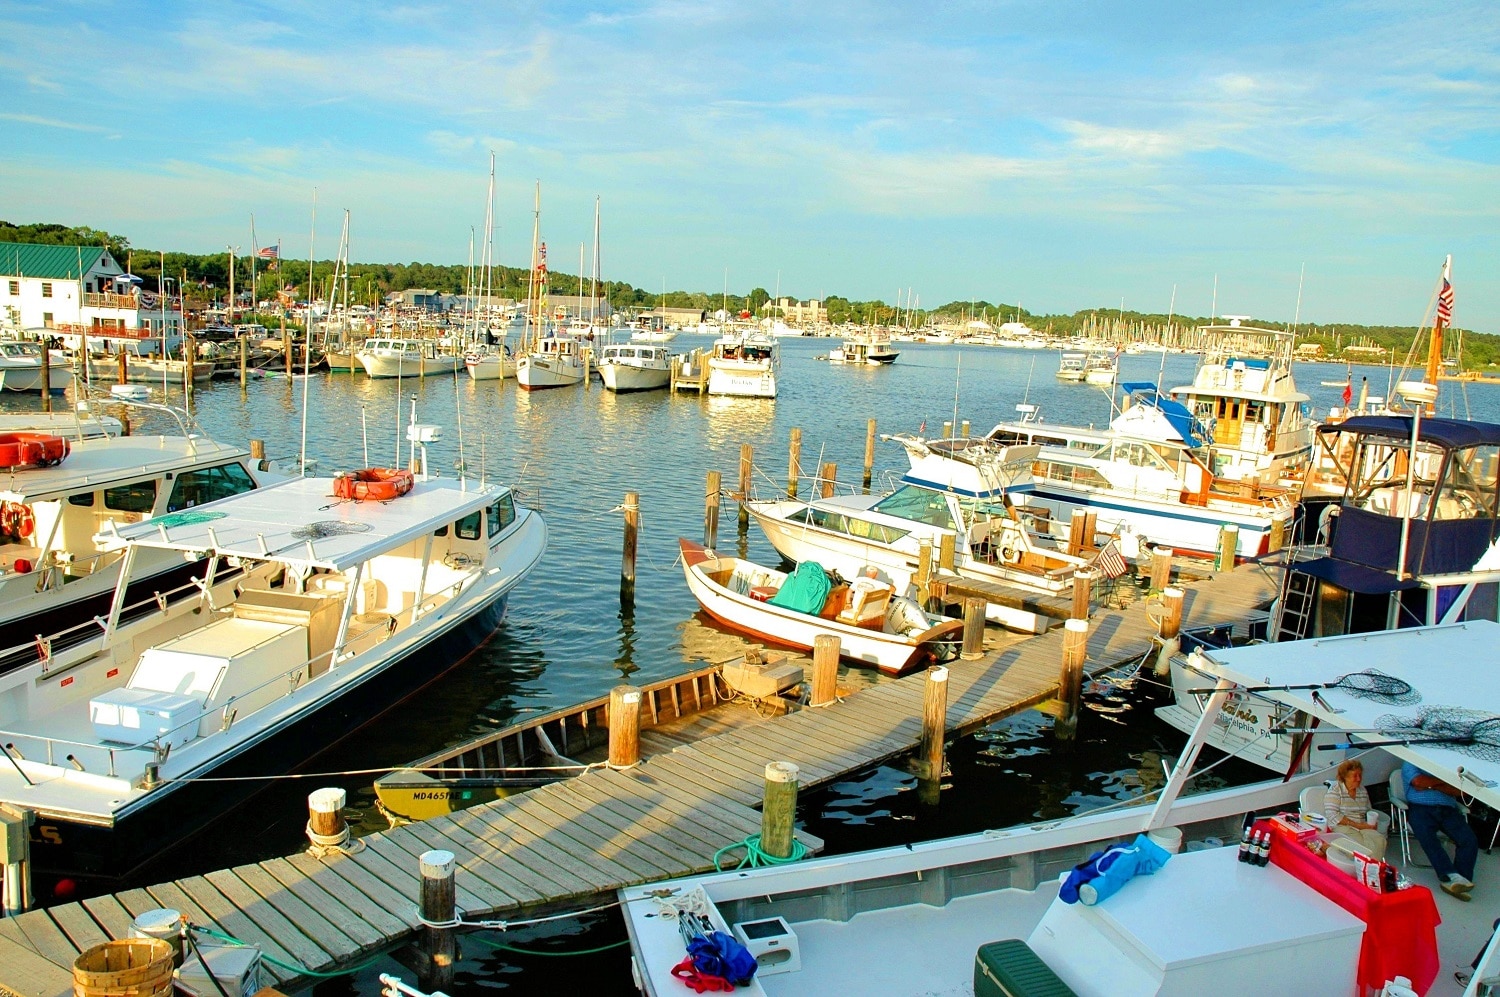 Have An Outstanding Time At The Chesapeake Bay Maritime Museum | Inn At